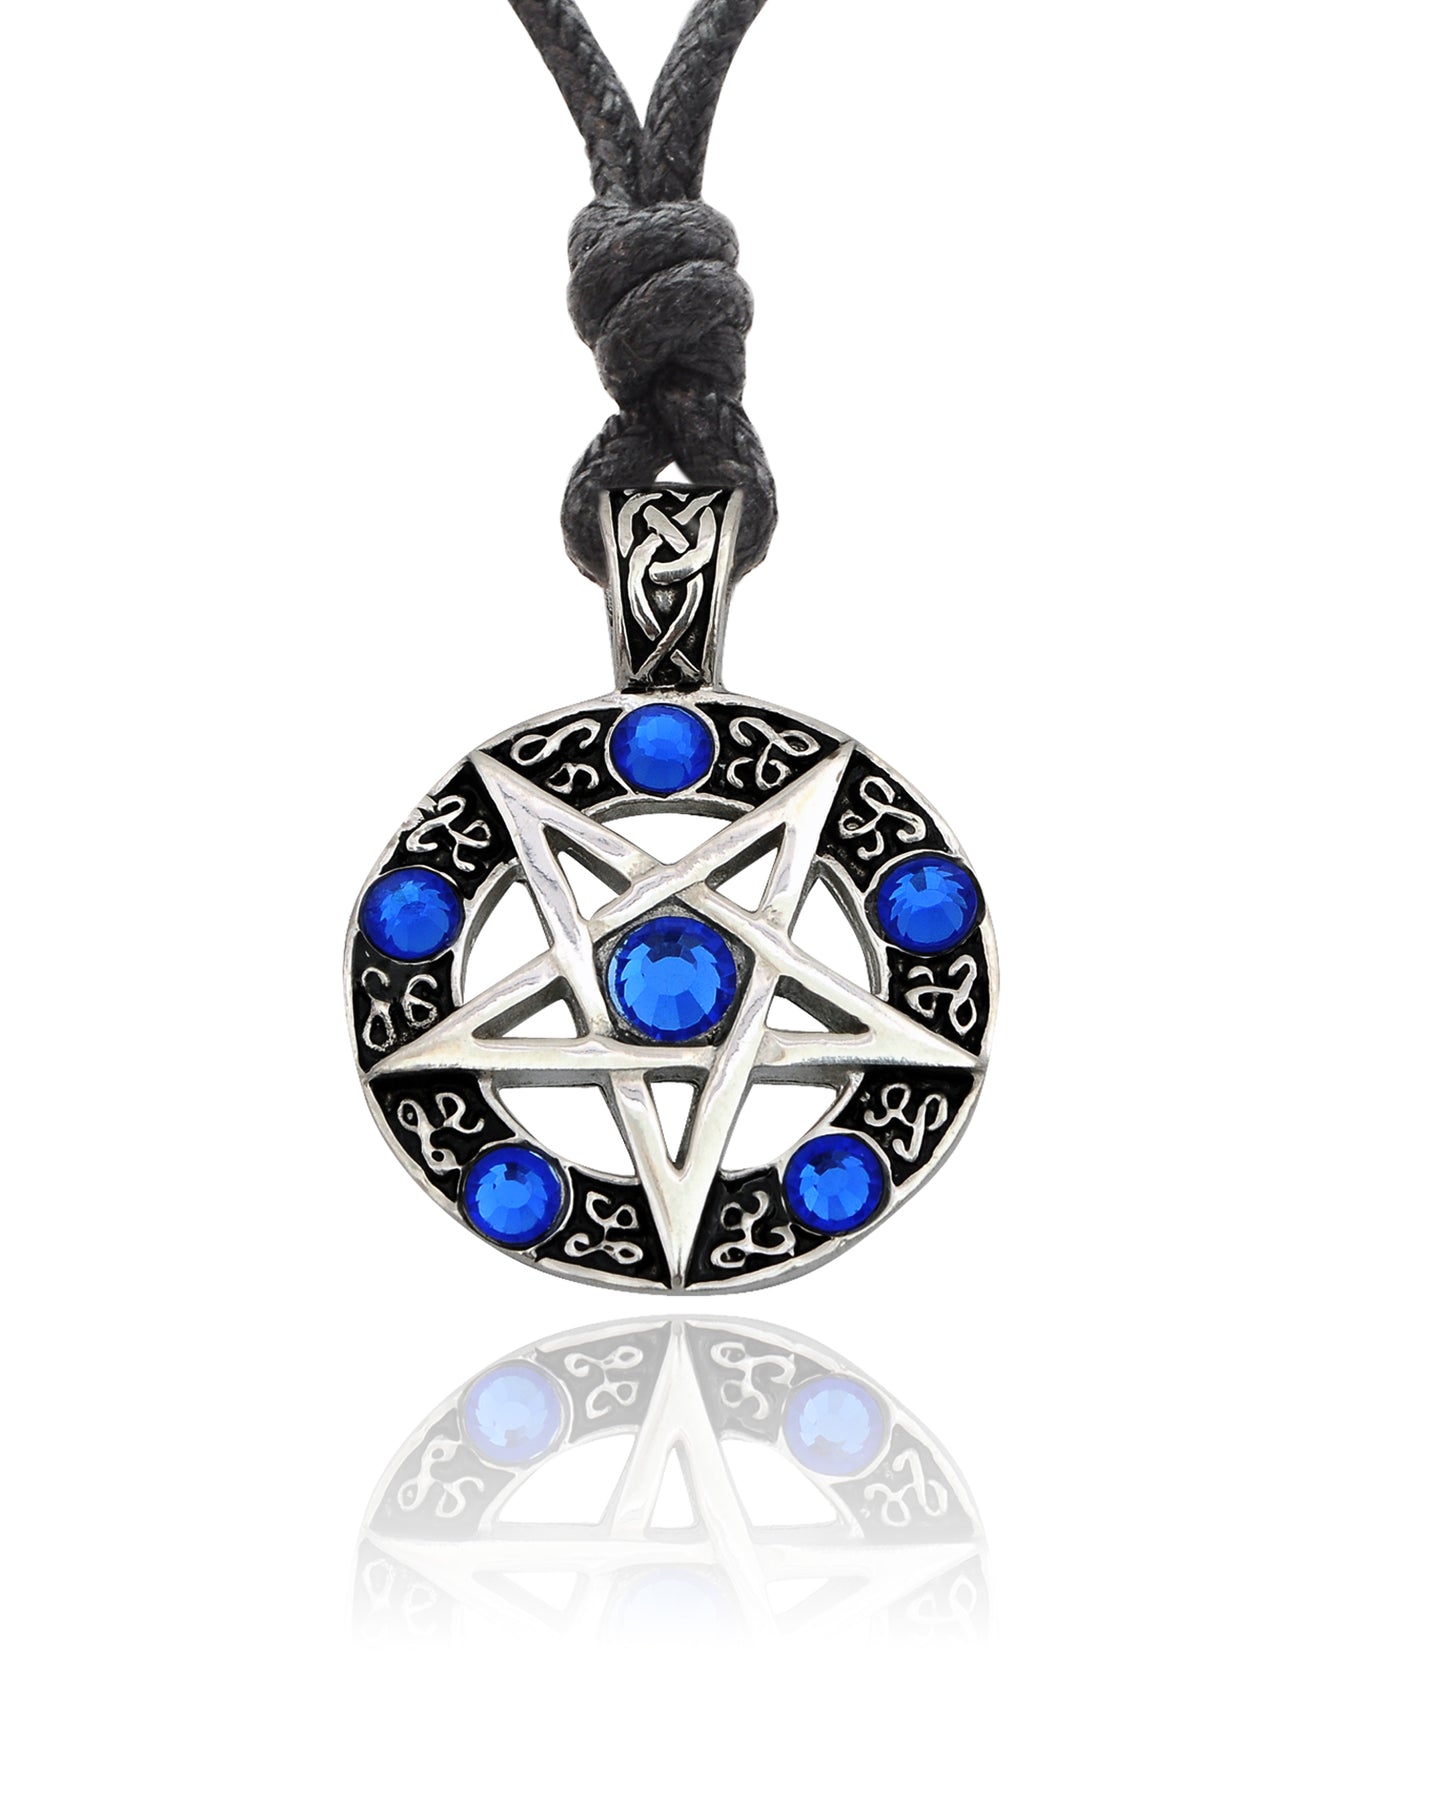 Pentagram Silver Pewter Charm Necklace Pendant Jewelry